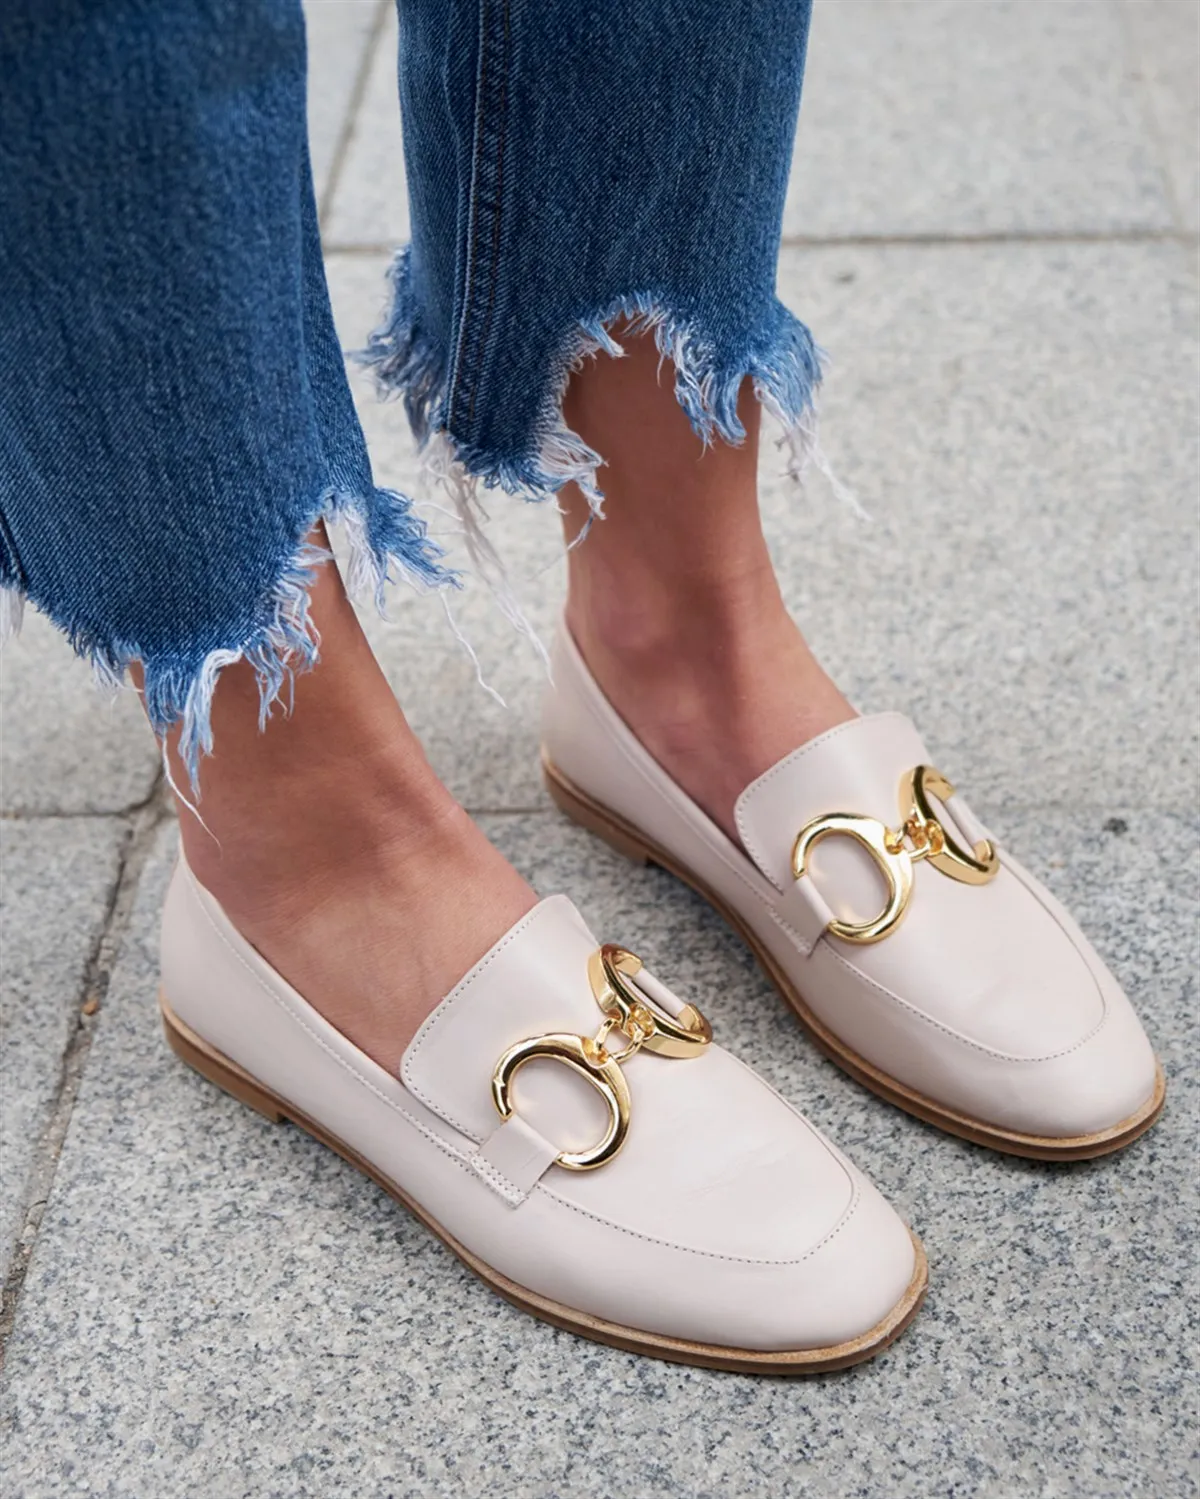 

Mercy Inner Outer Leather Flat Sole Women's Flats Gold Ring Detail Tan Black Ecru Colored Casual Shoes Office School Business